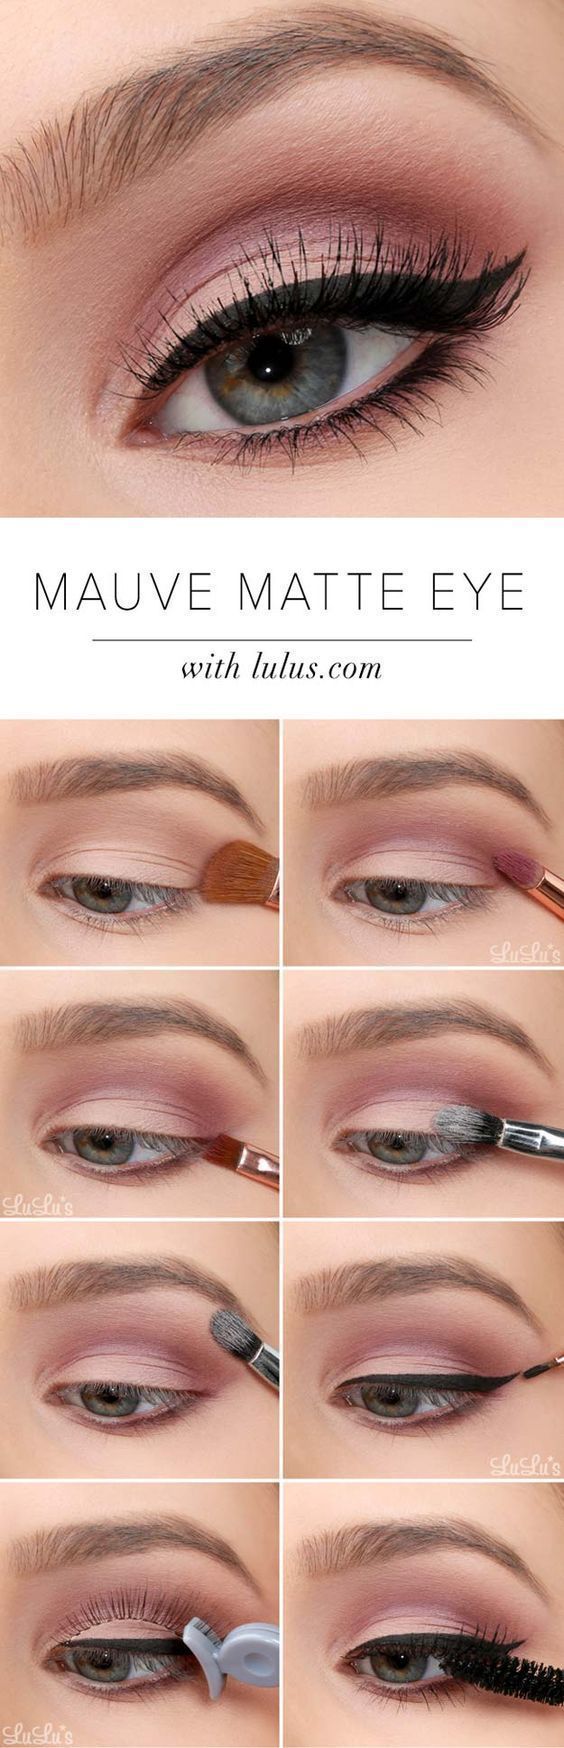 Sexy Eye Makeup Tutorials – Mauve Matte Eye Tutorial – Easy Guides on How To Do …